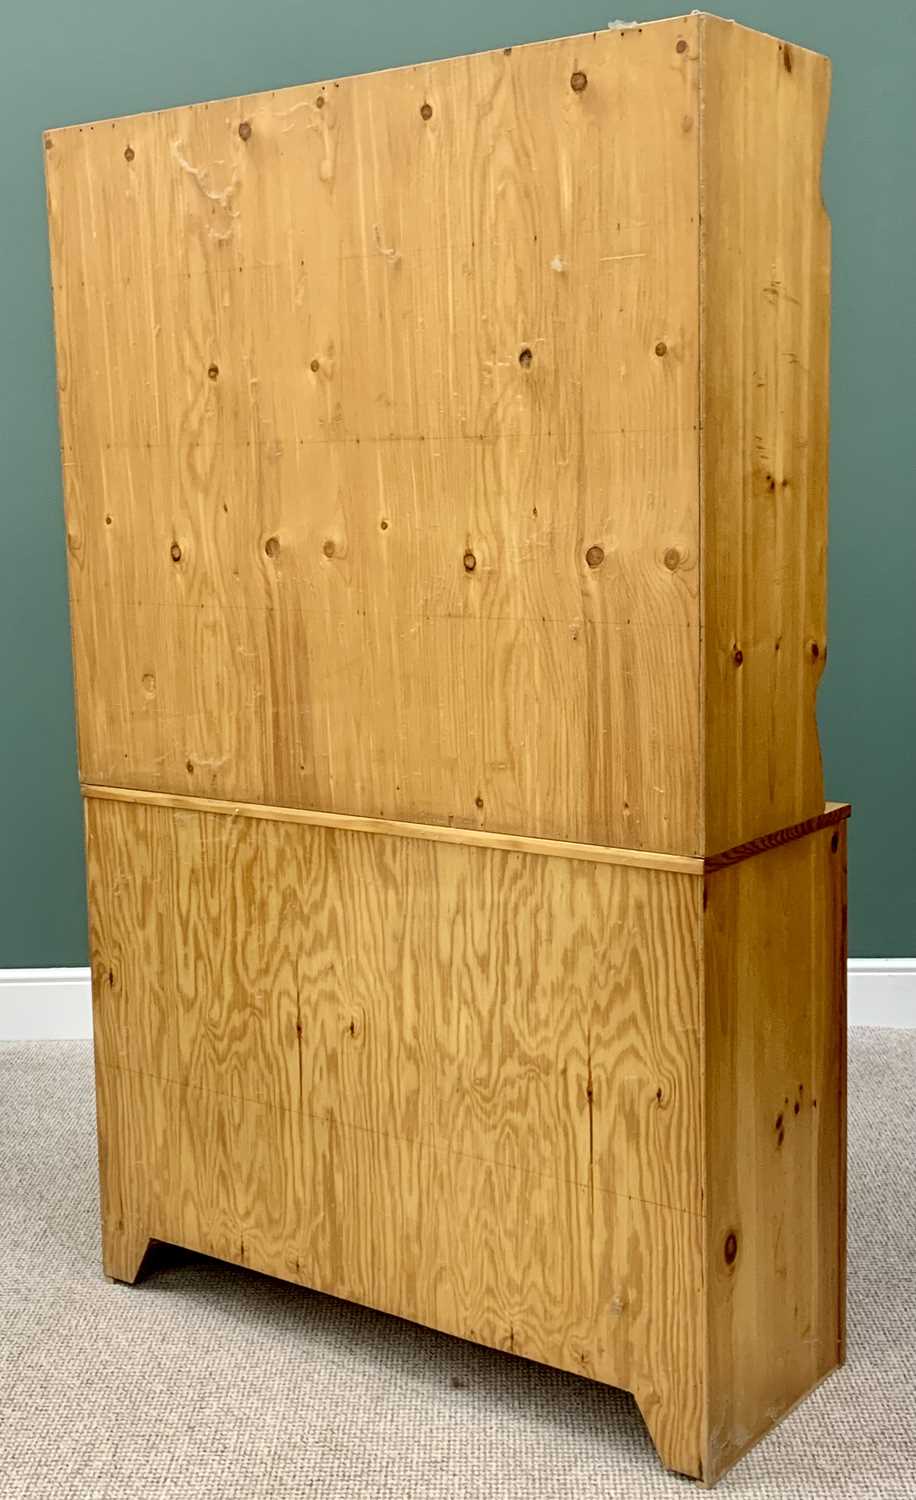 MODERN PINE DRESSER - 183cms H, 113cms W, 43cms D and TWO MULTI-SHELVED ROOM DIVIDERS - 156cms H, - Image 5 of 5